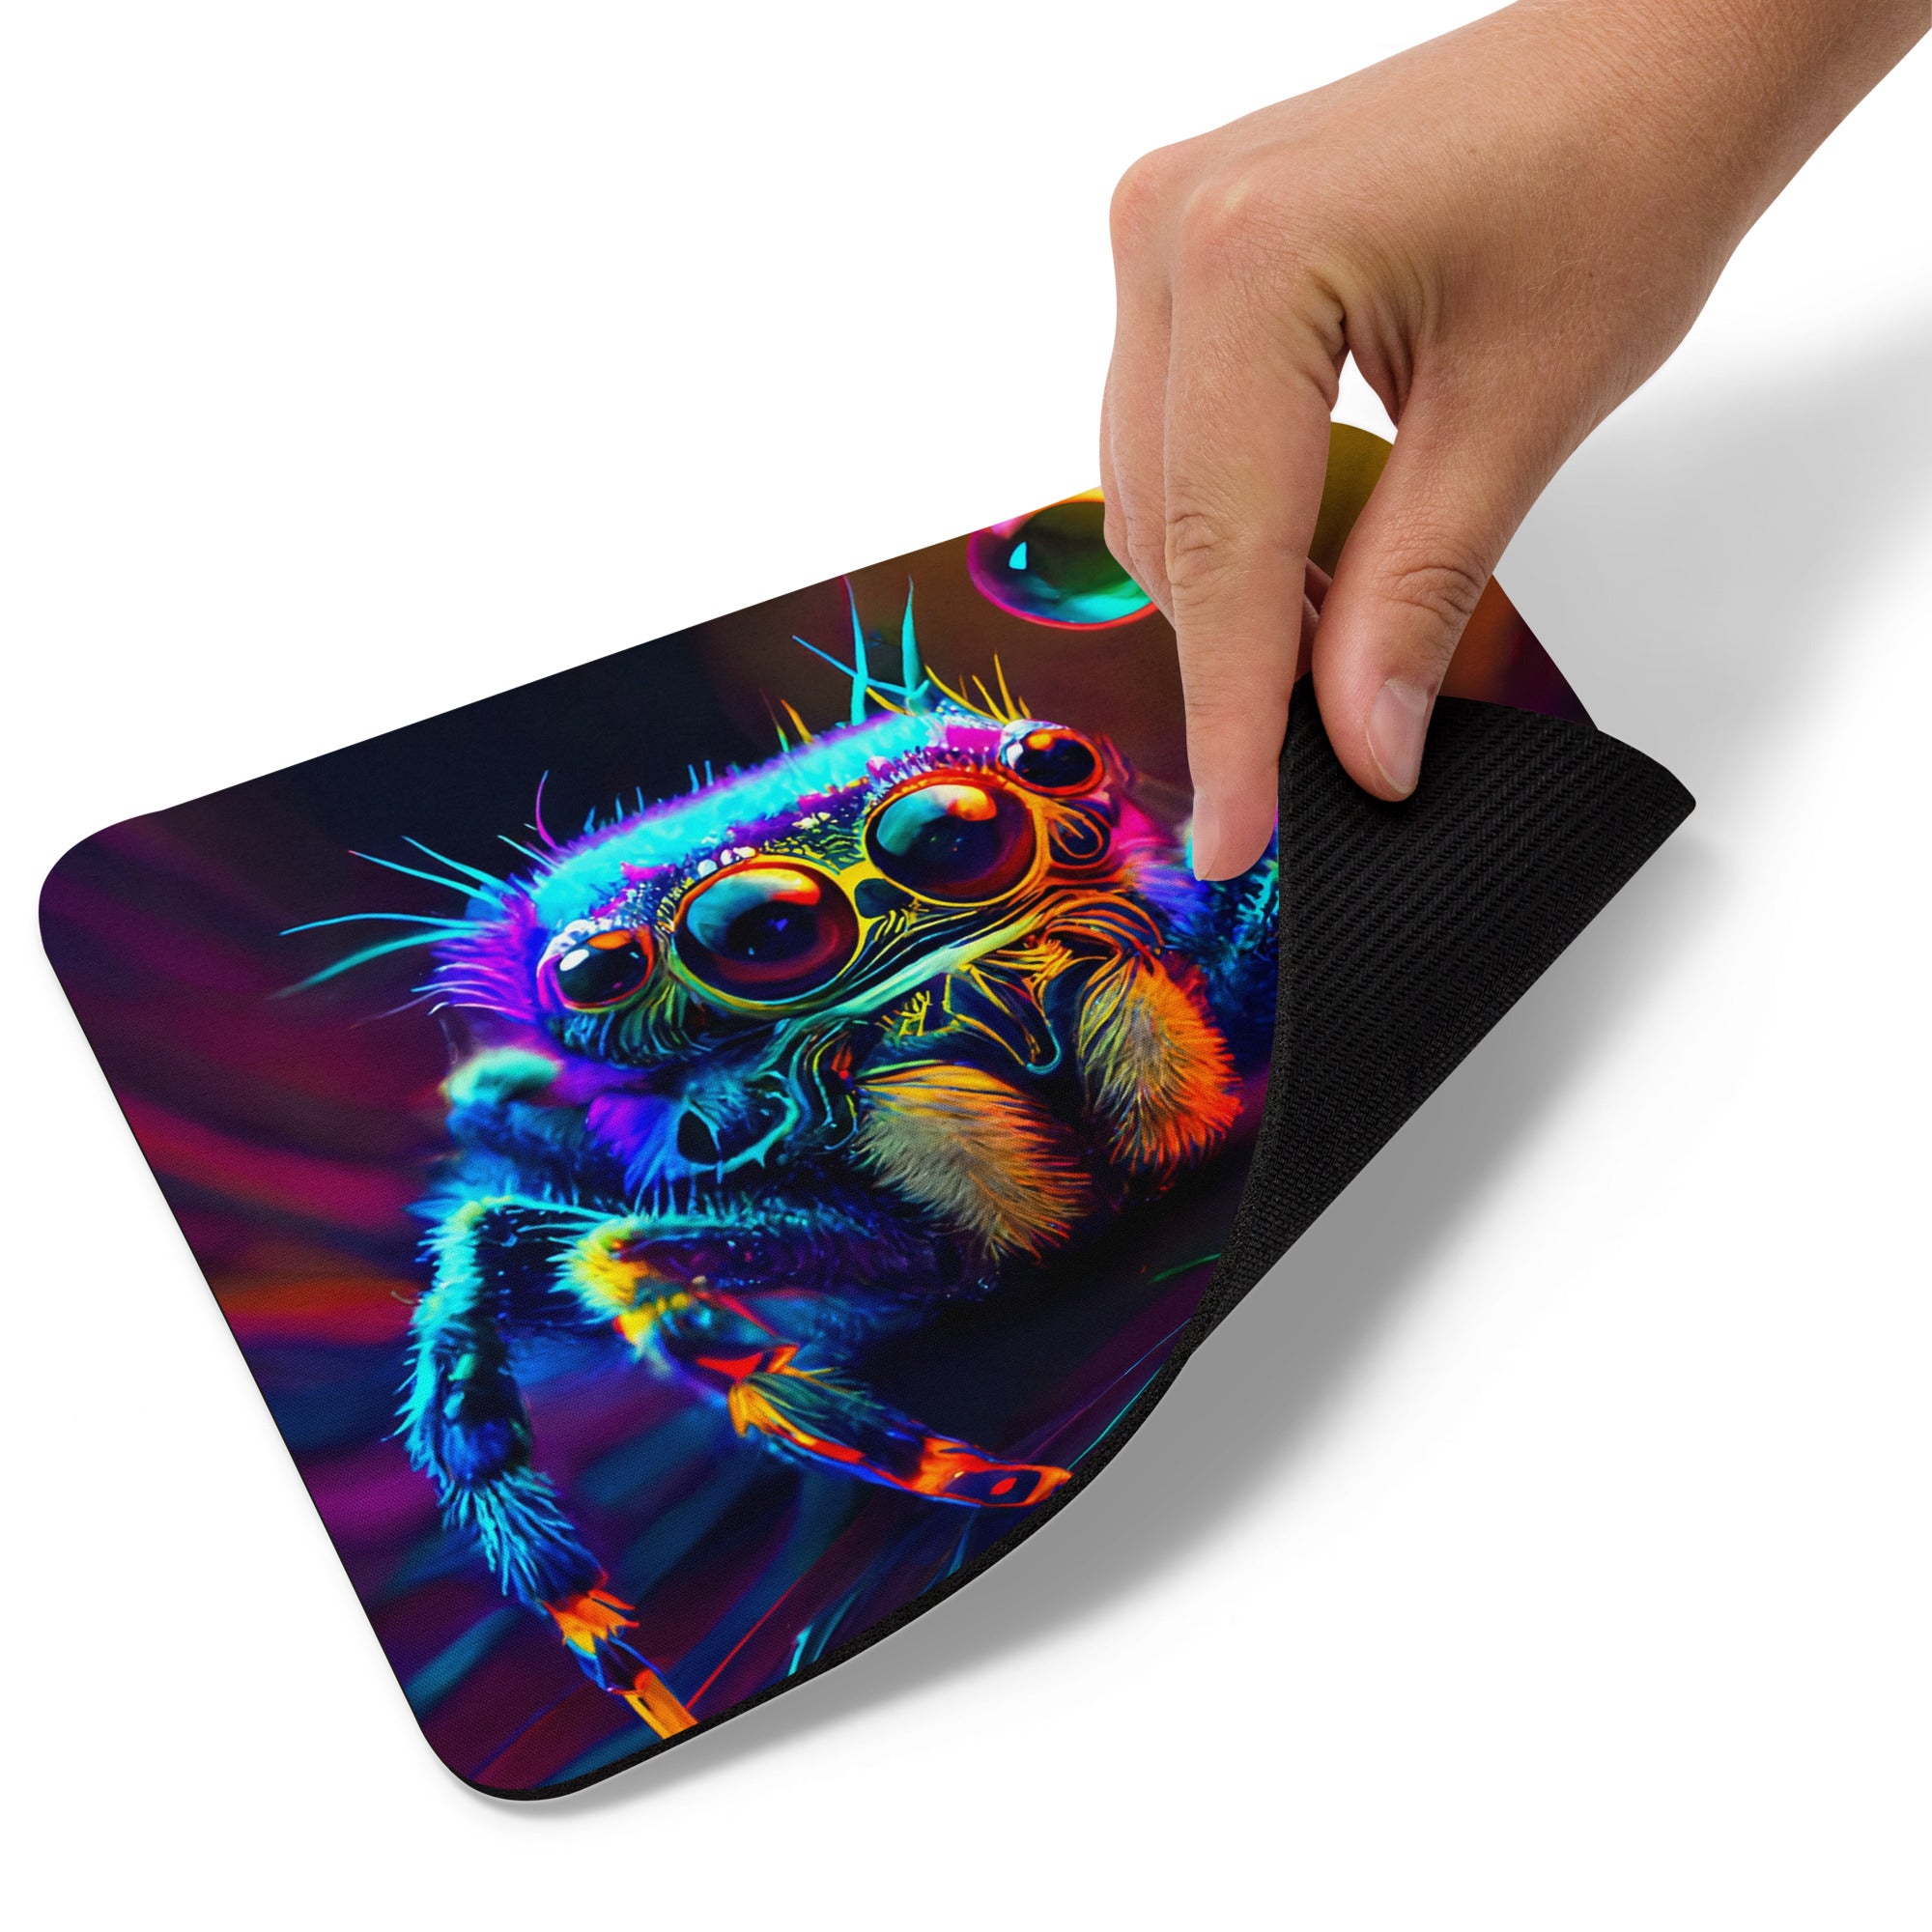 Trippy Regal Jumping Spider Mouse pad - Jumping Spiders For Sale - Spiders Source - #1 Regal Jumping Spider Store